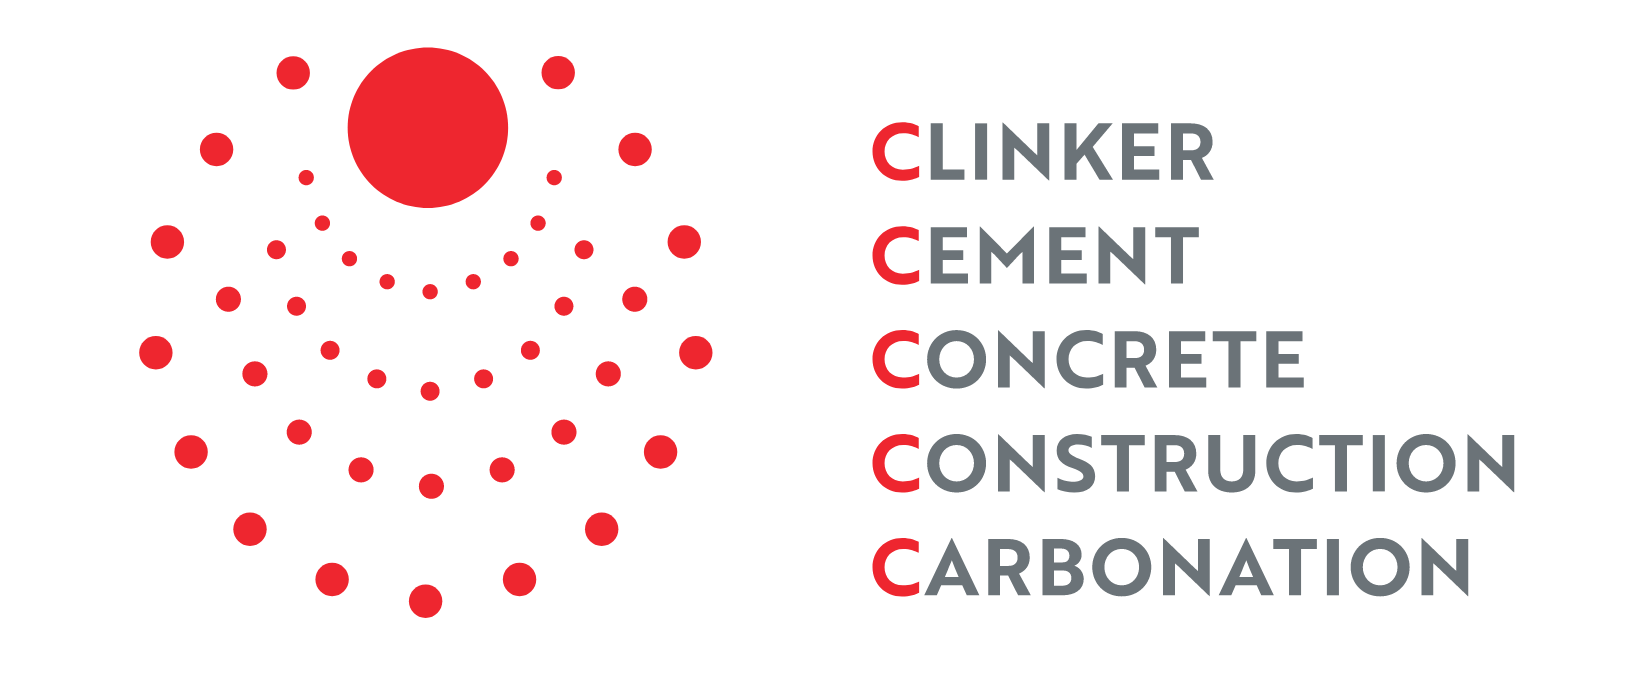 The five stages of the cement & concrete value chain: clinker, cement, concrete, construction and carbonation